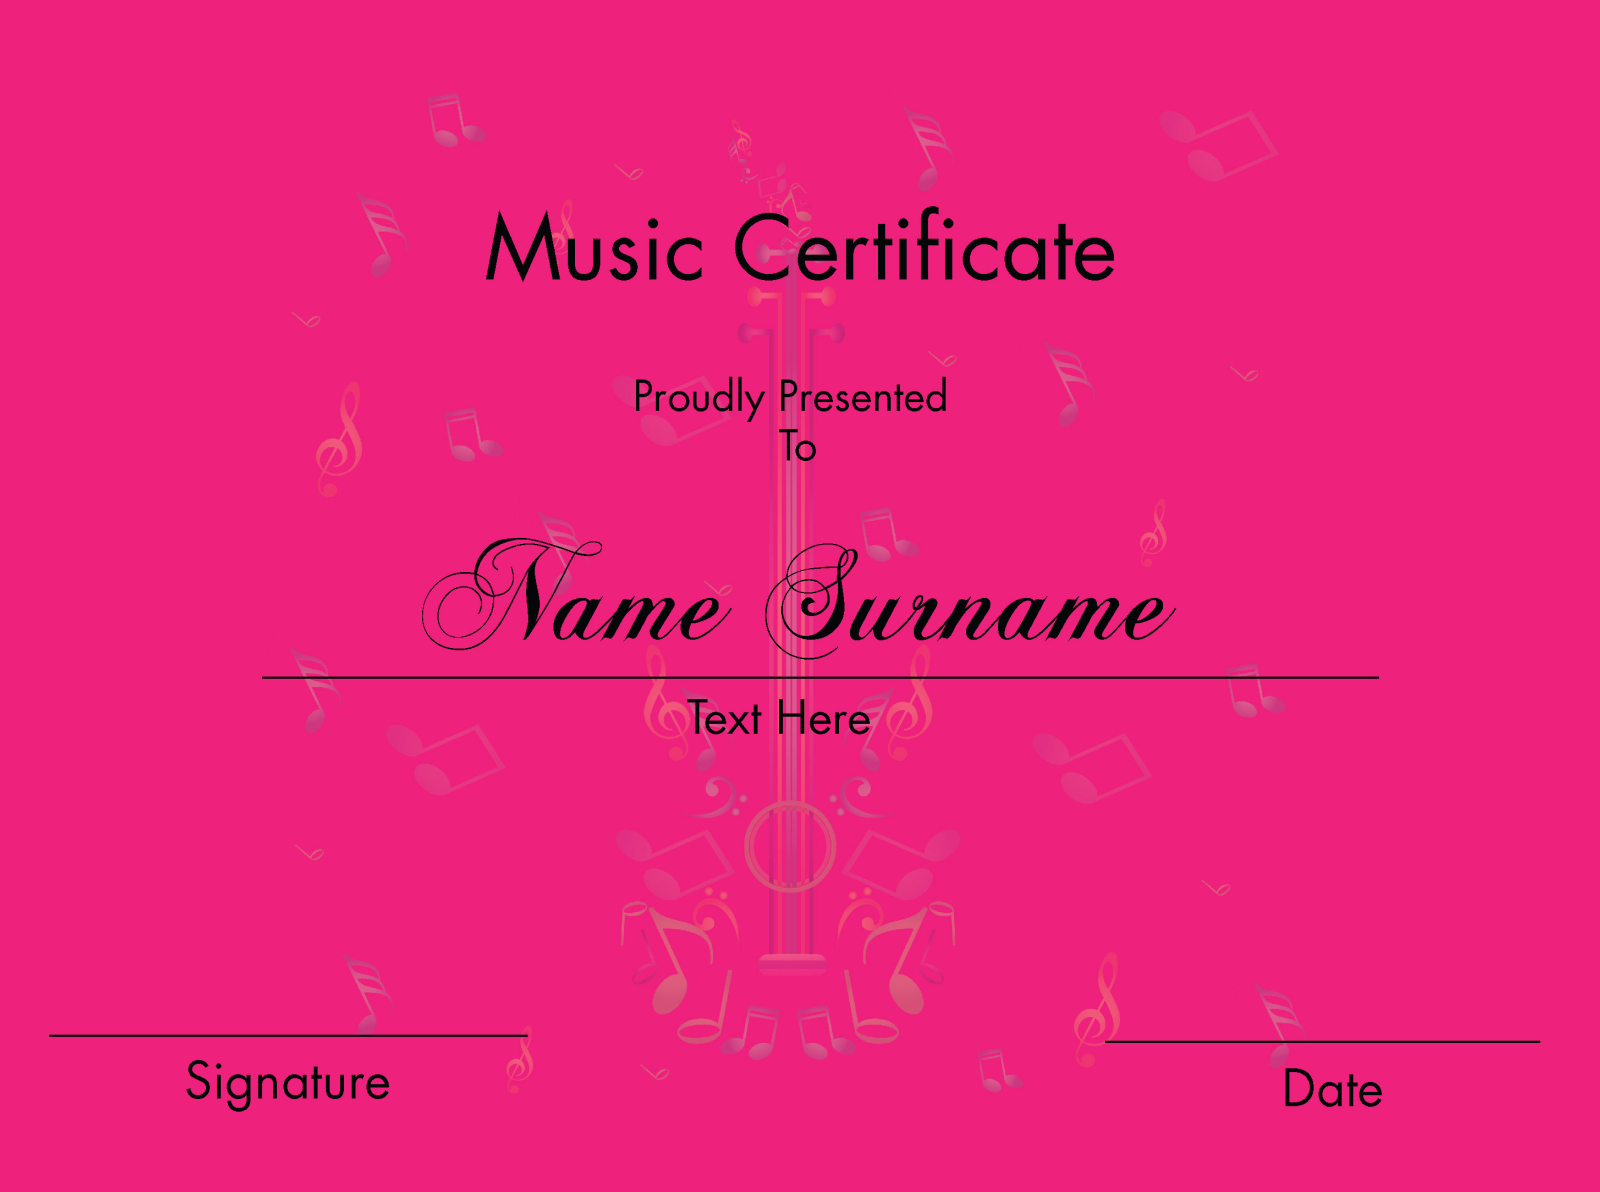 music-certificate-by-livumile-magoqwana-on-dribbble